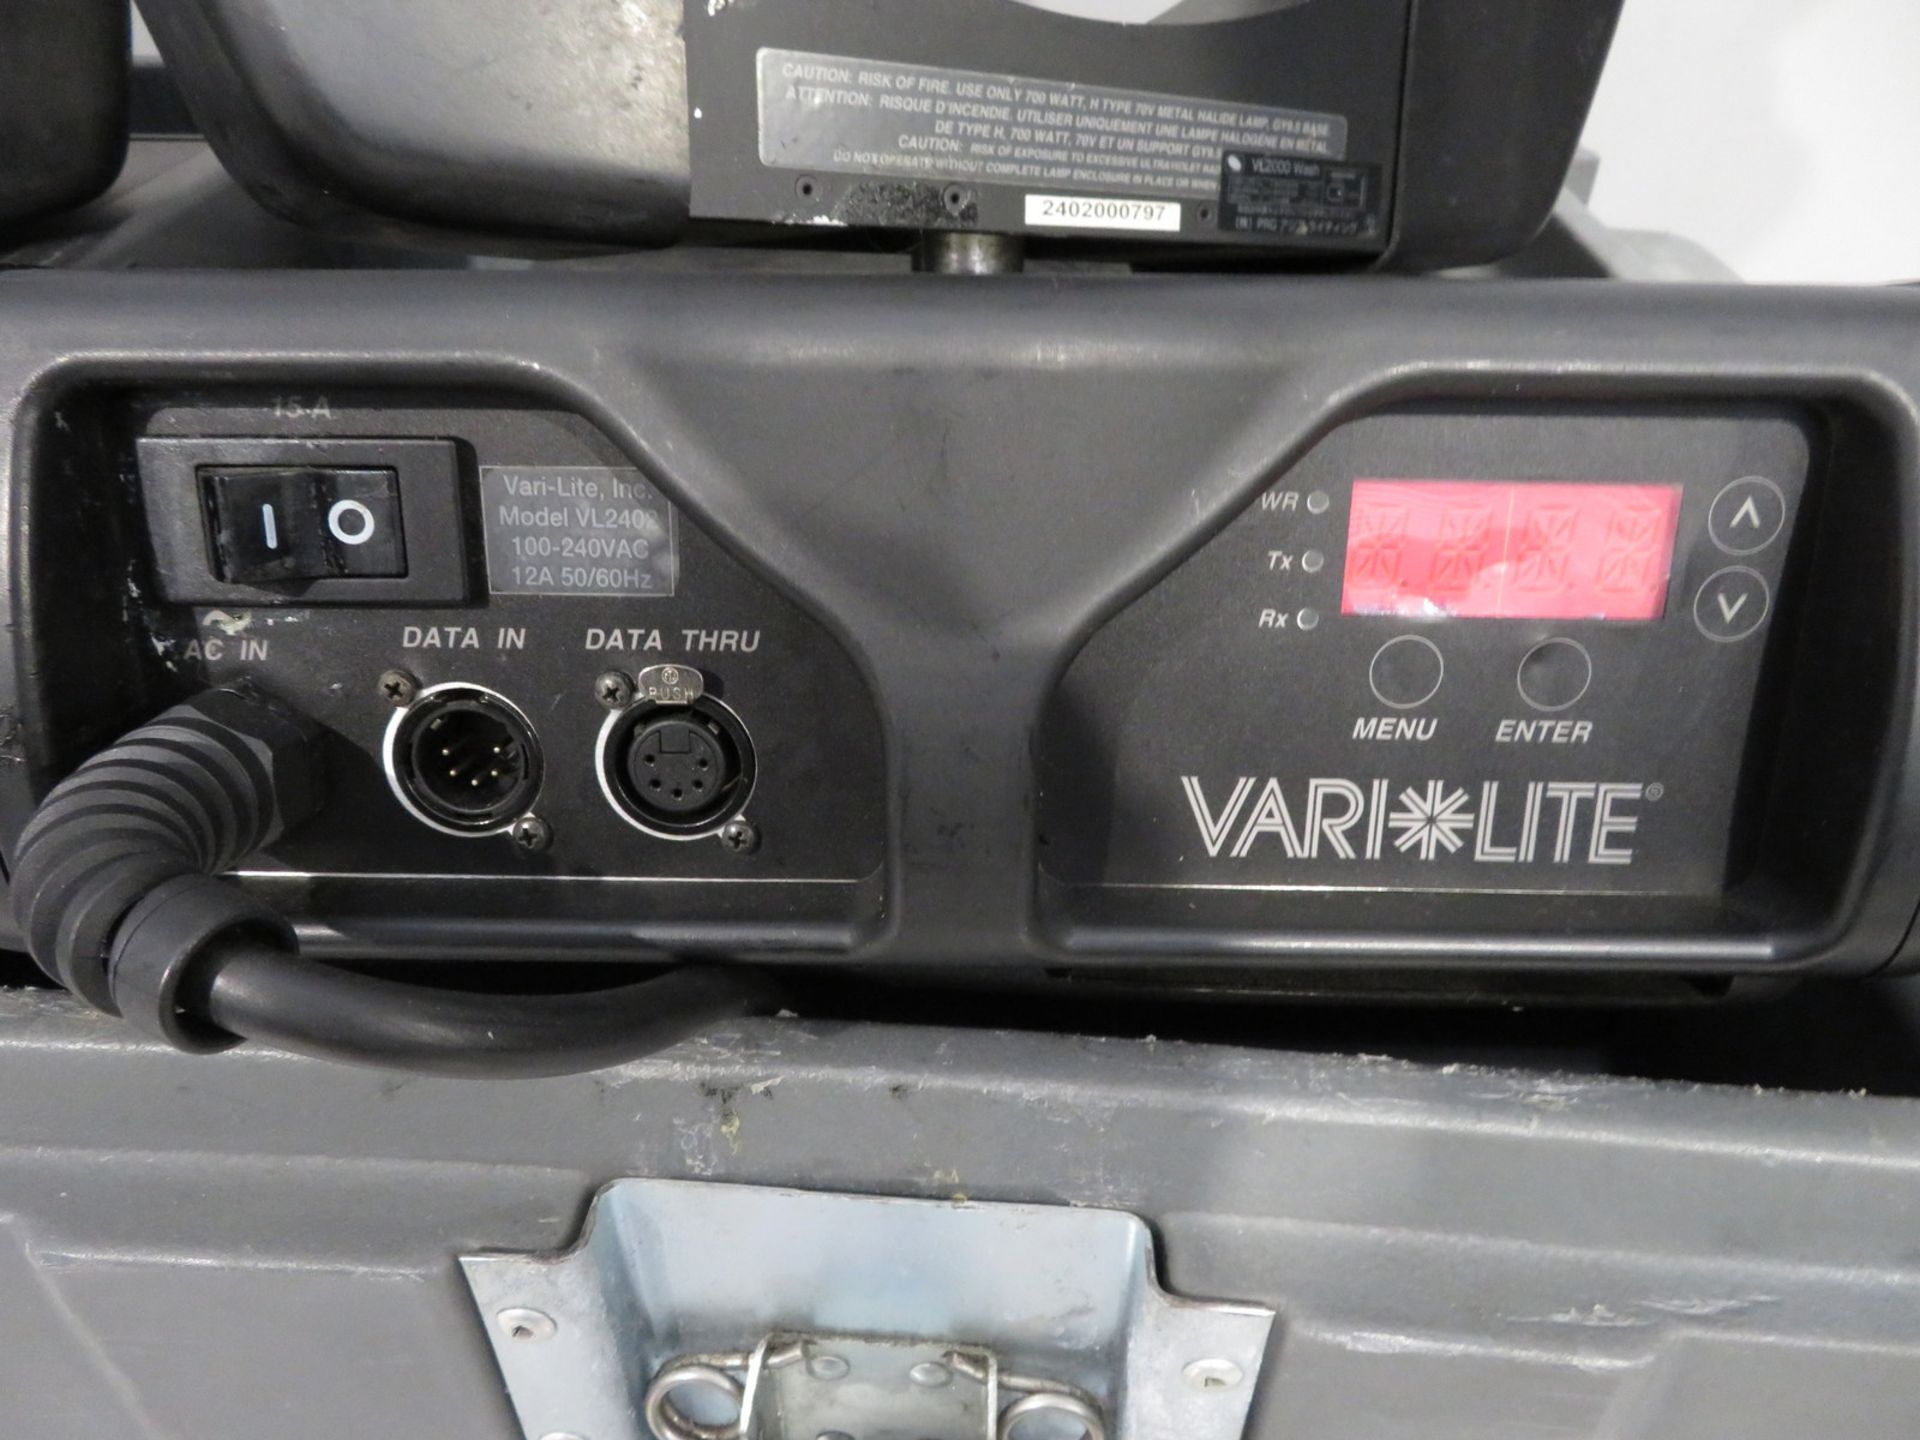 Pair of Varilite VL2402 Wash in flightcase. Includes hanging clamps and safety bonds. Work - Image 6 of 8